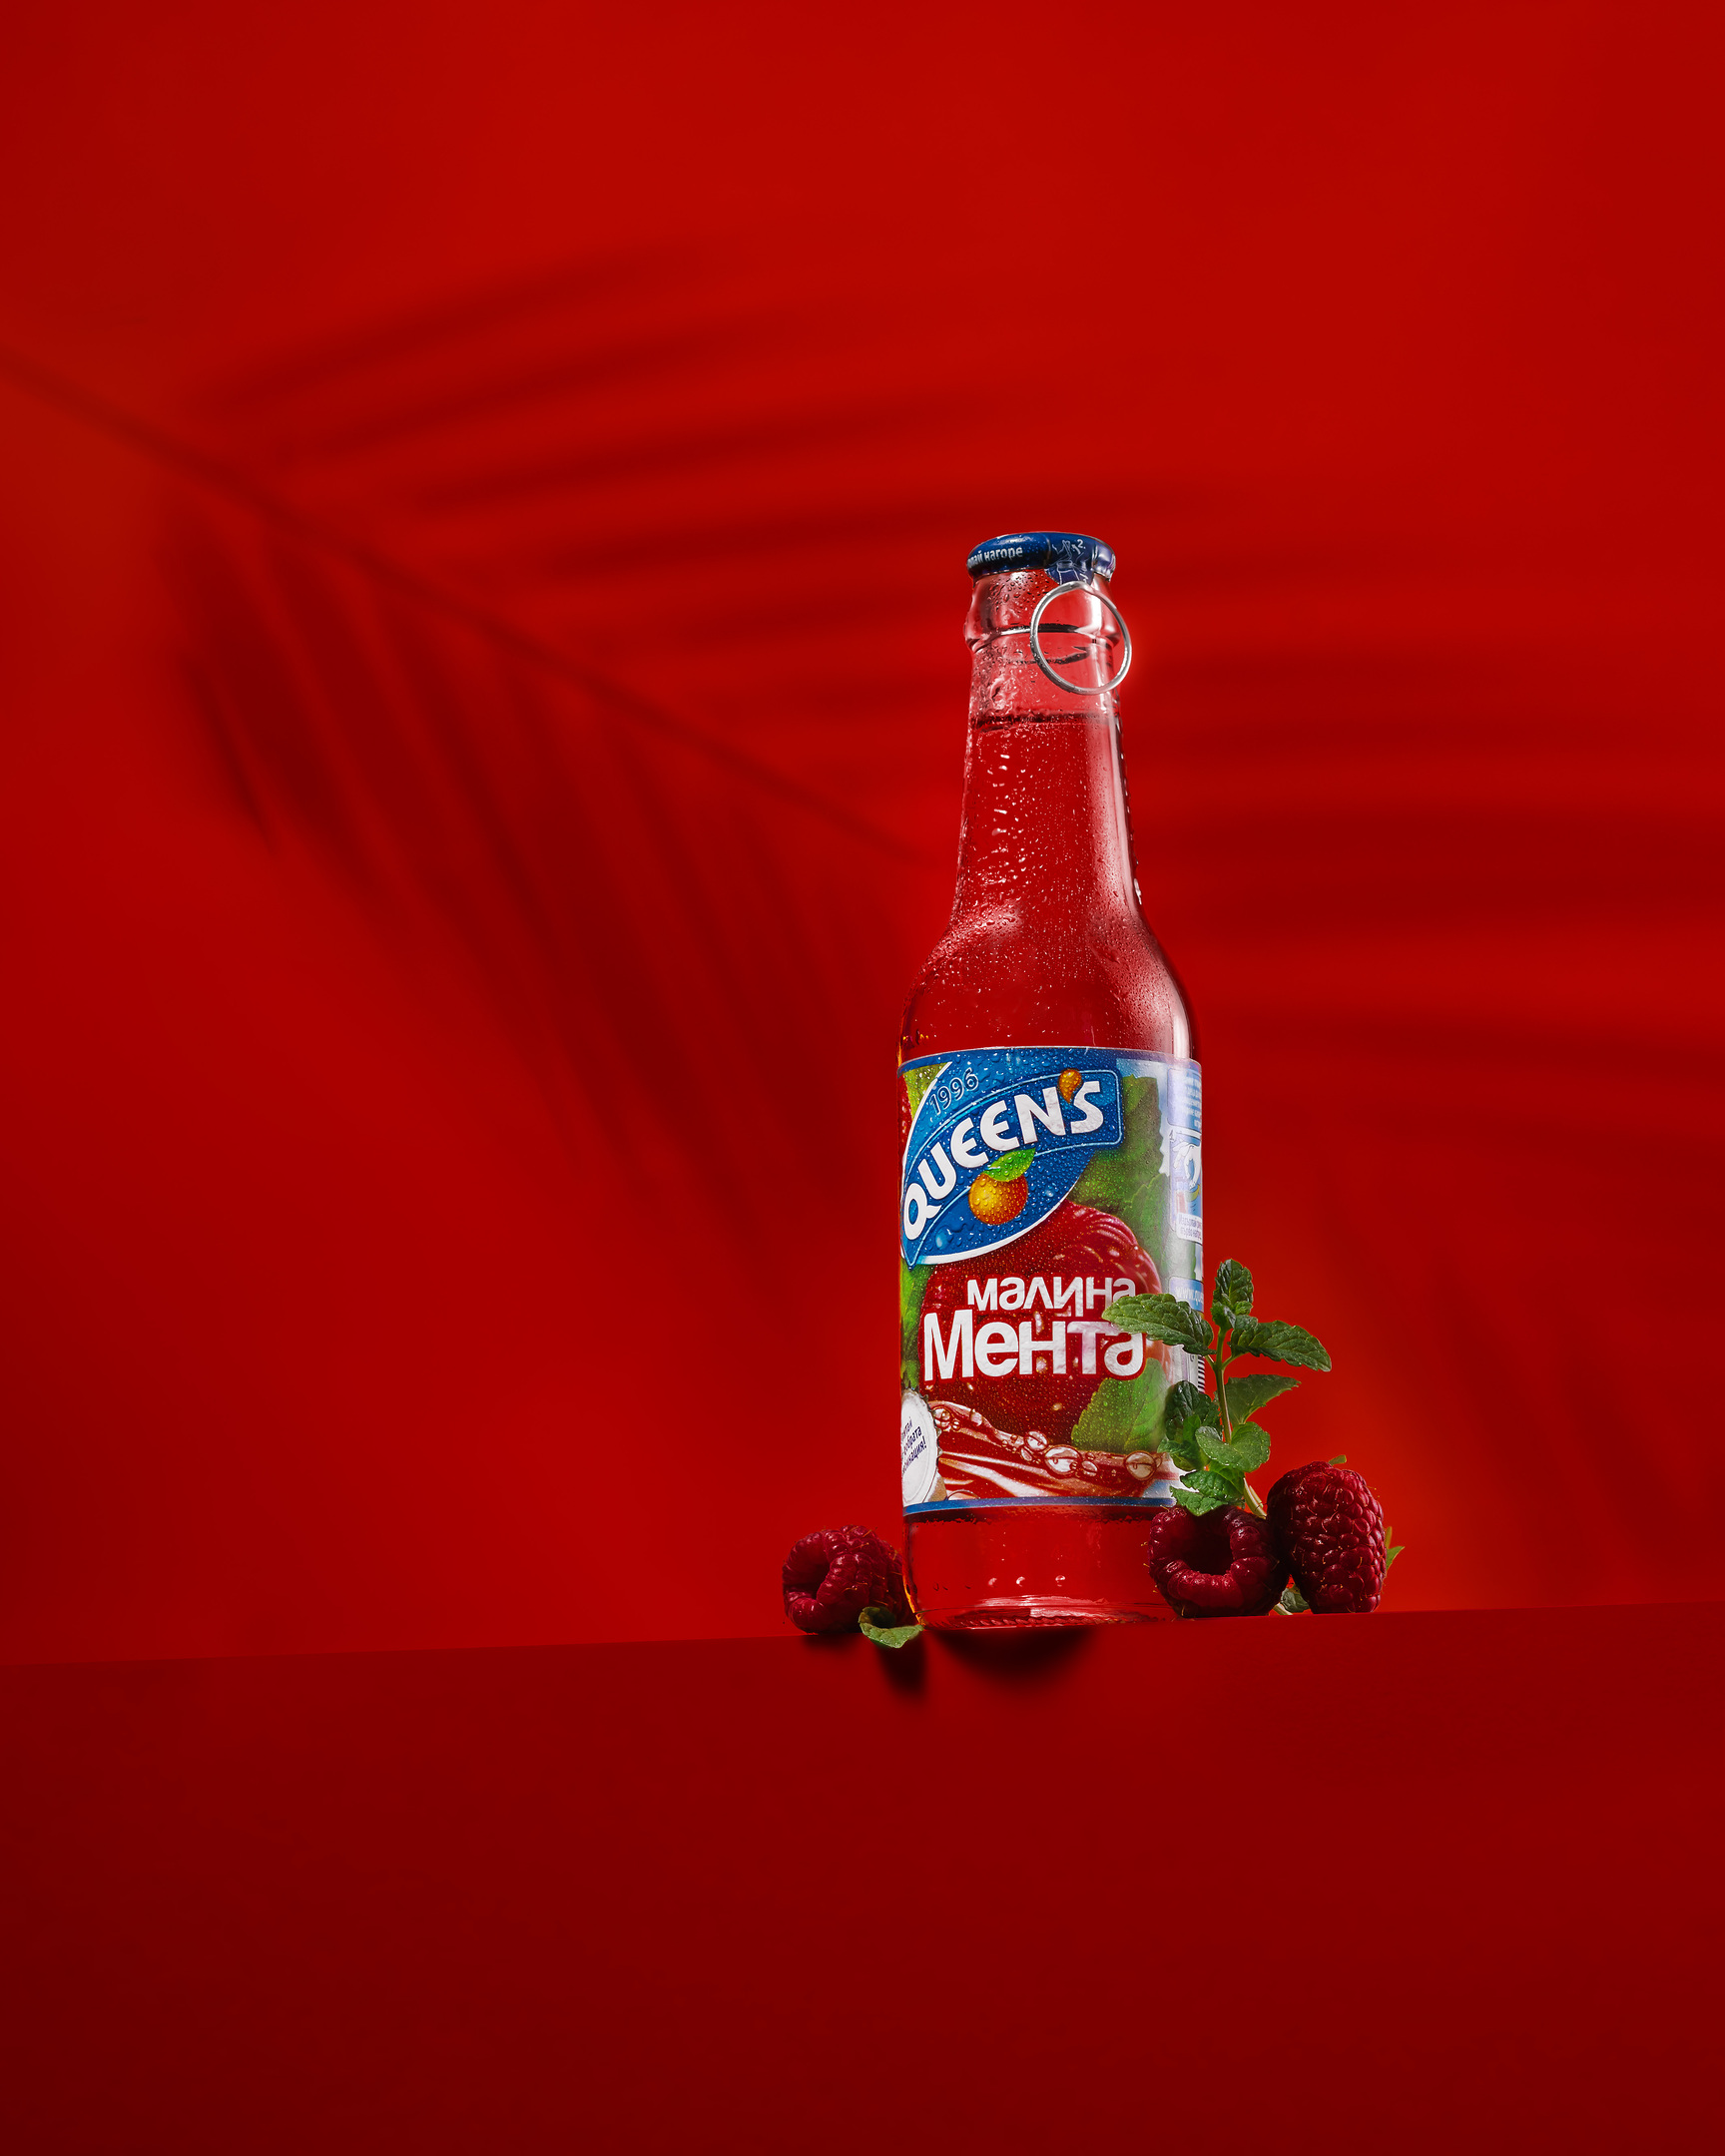 Queen's - Raspberry and Mint. A bottle is on an edge of something. The background is red like a raspberry. There is a mint and a couple of juicy raspberries around the bottle.